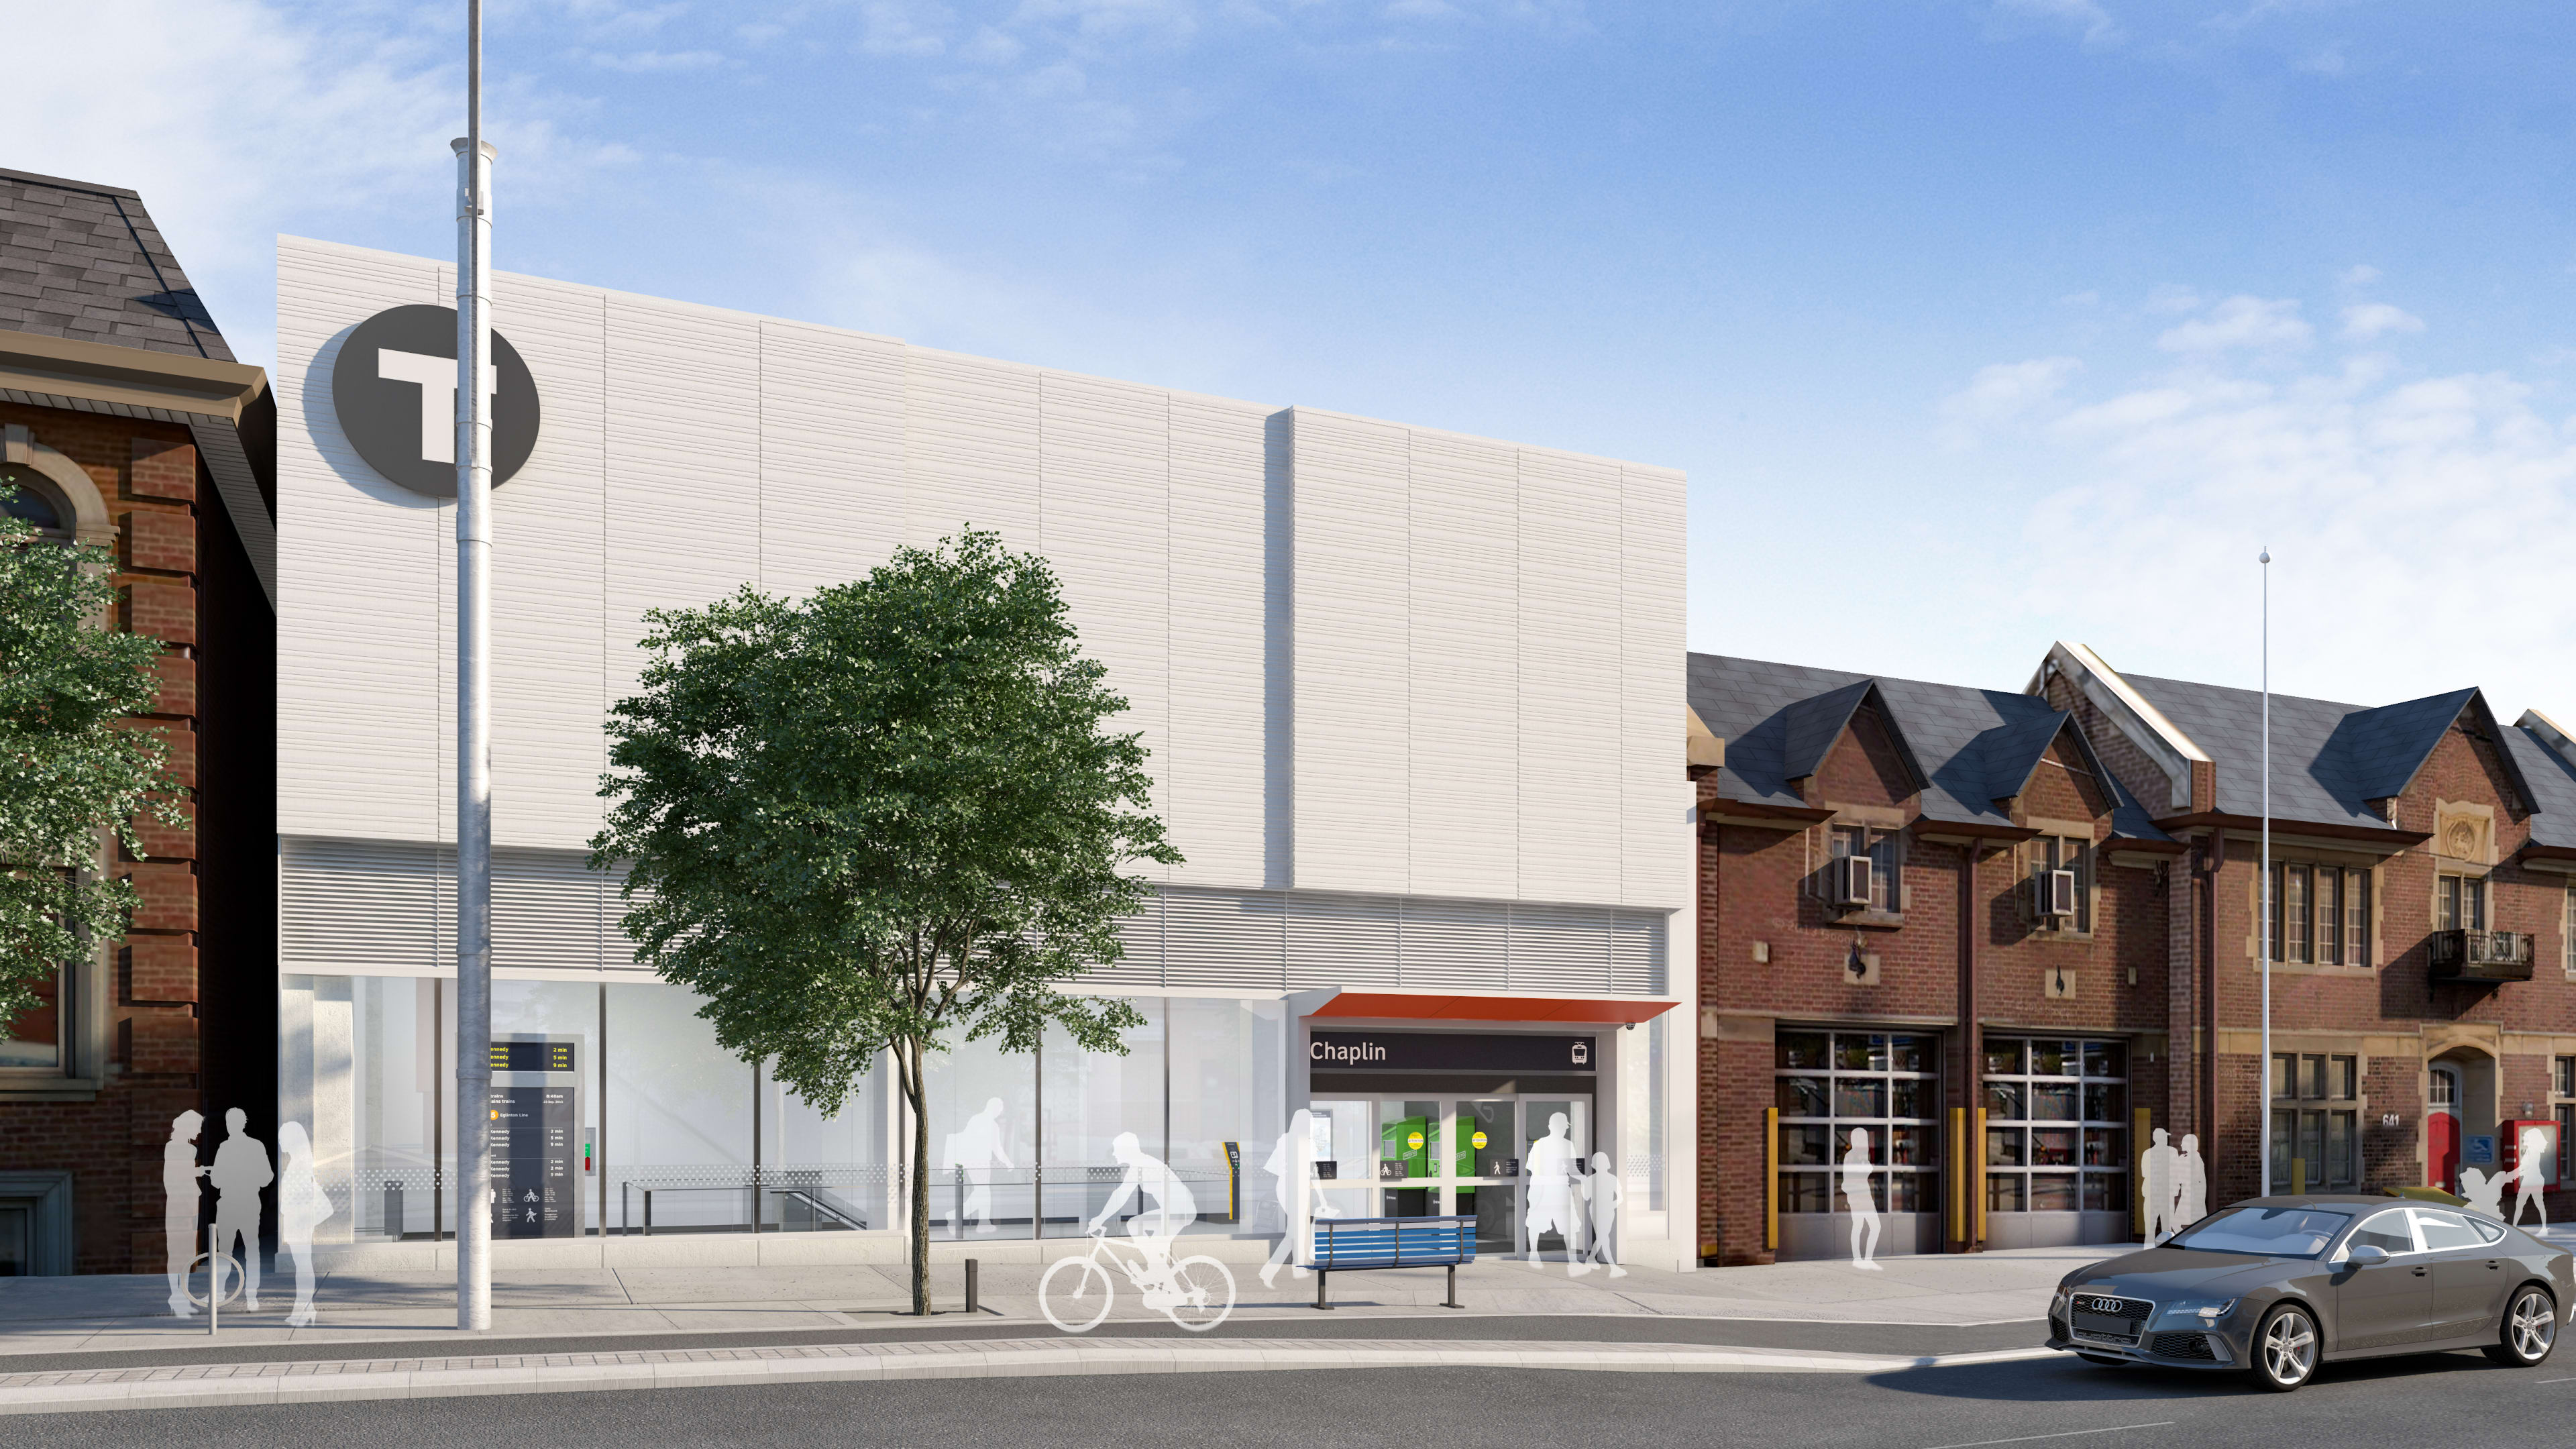 In an artist rendering, an old fire station is connected to the left of the new LRT station.